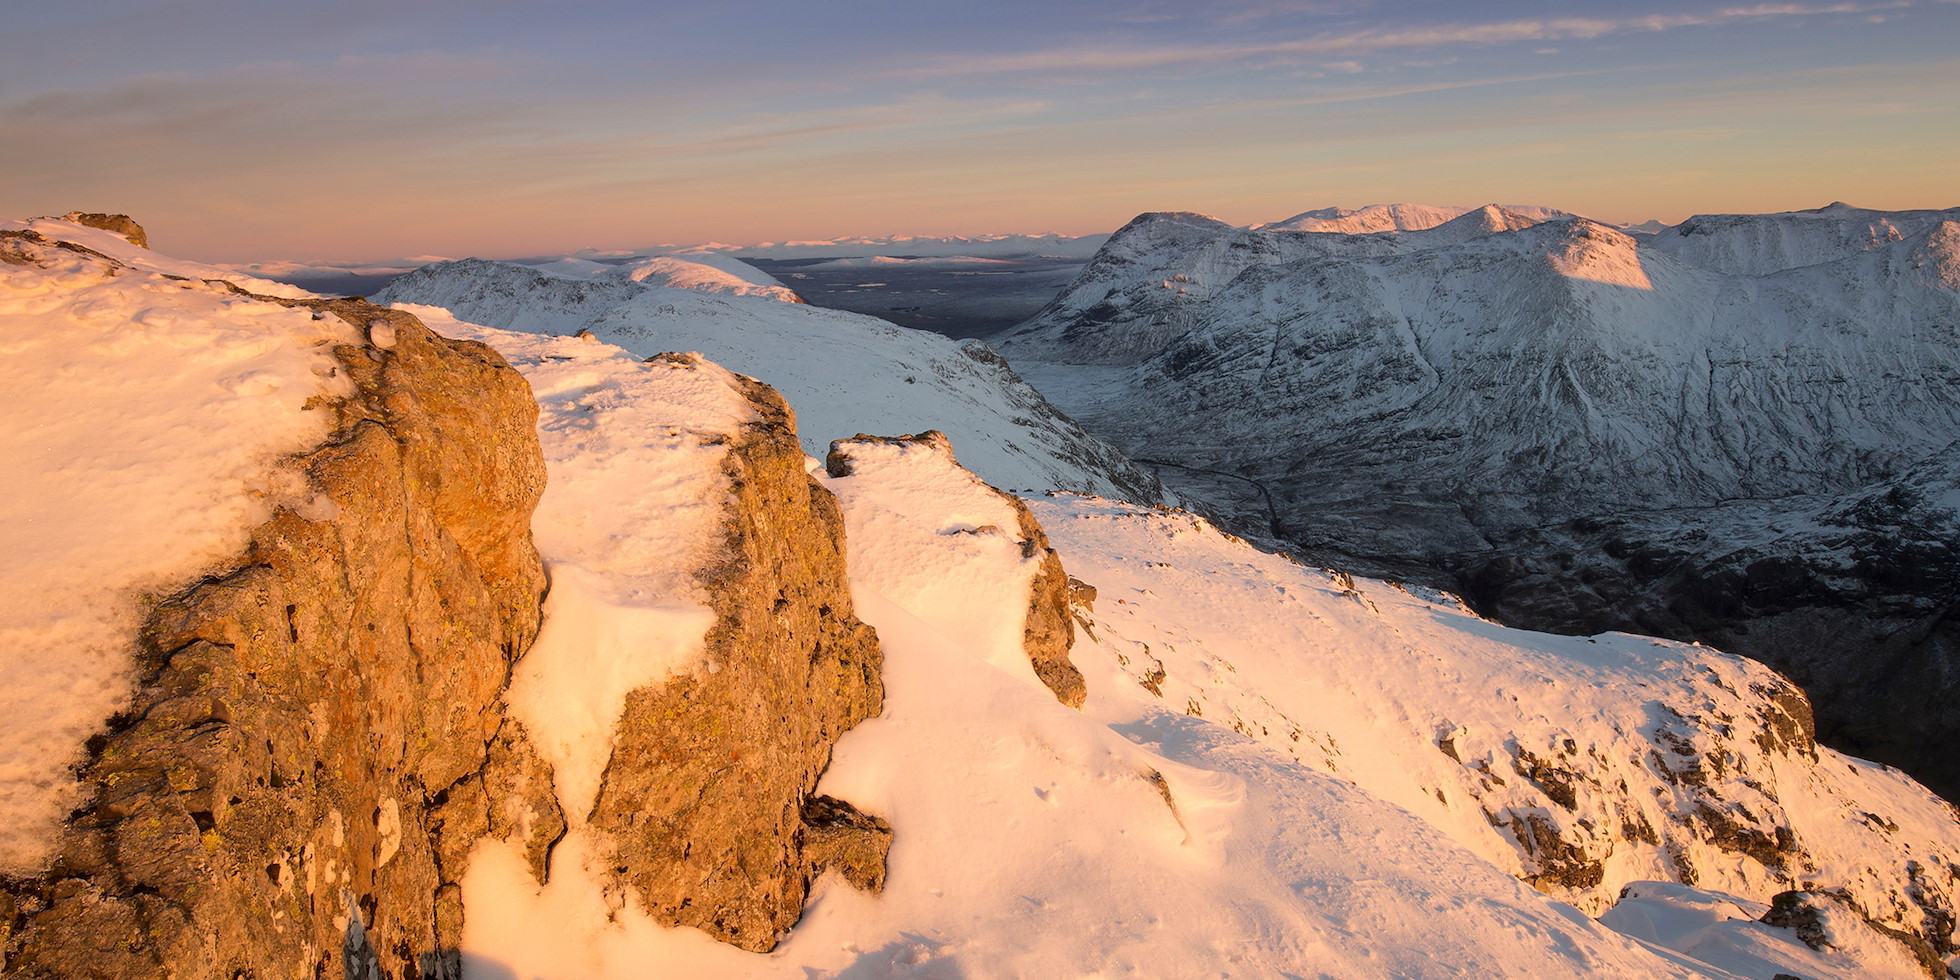 View looking south east from Am Bodach towards Stob nan Cabar and Buachaille Etive Beag in winter, Glen Coe, Lochaber, Scotland.